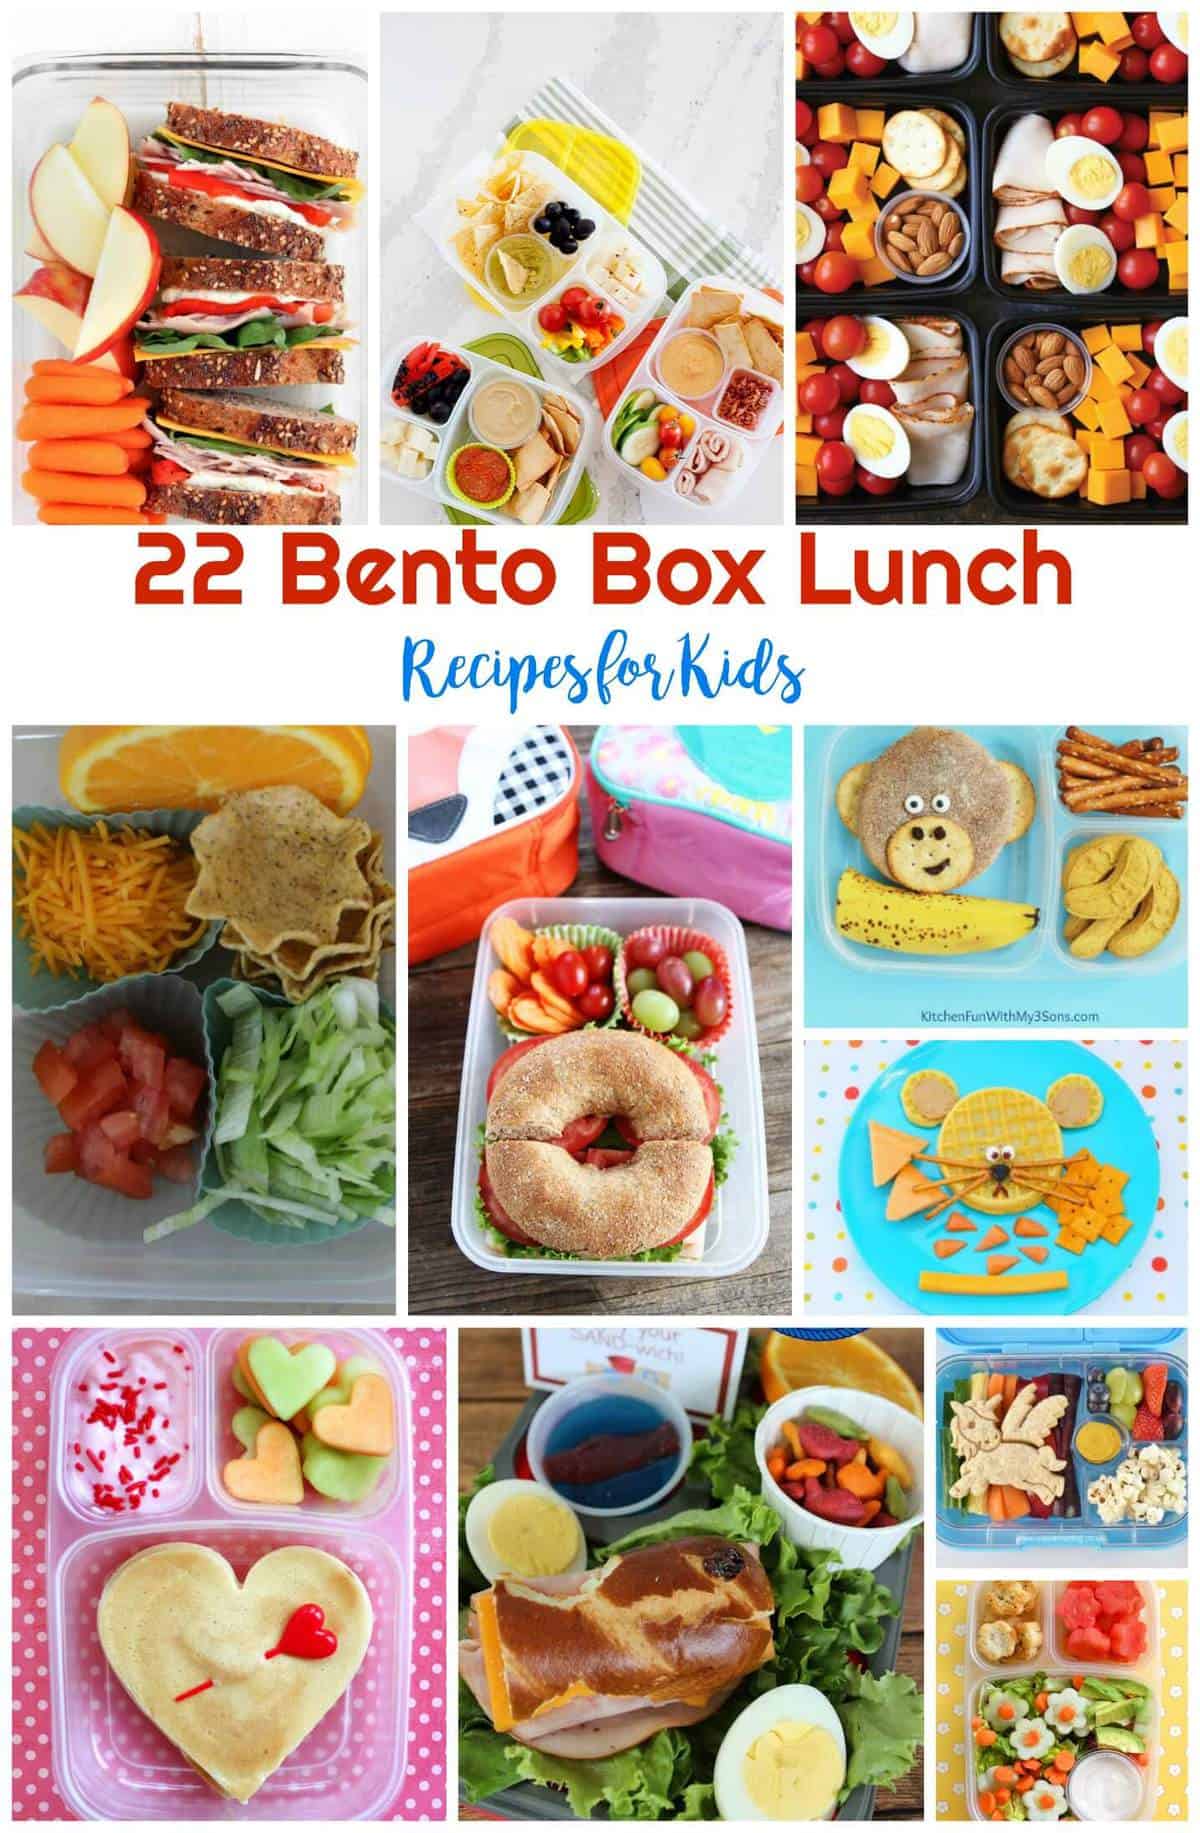 22 Bento Box Lunch Recipes for Kids | Healthy Living in Body and Mind